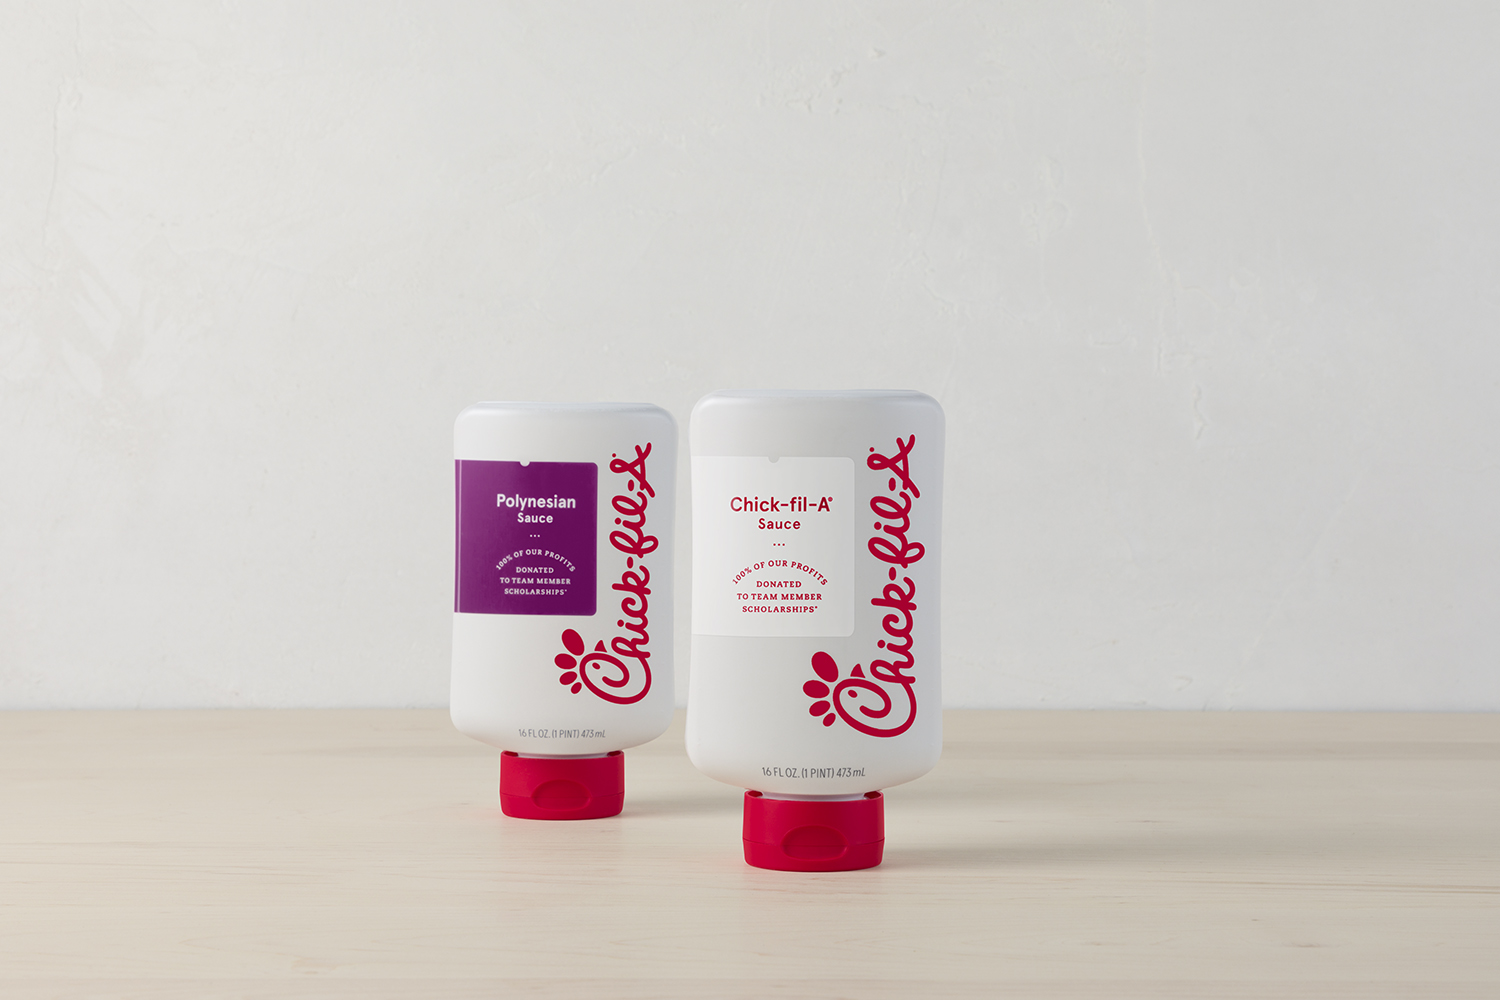 Chick-fil-A sauces will soon be available in Alabama grocery stores